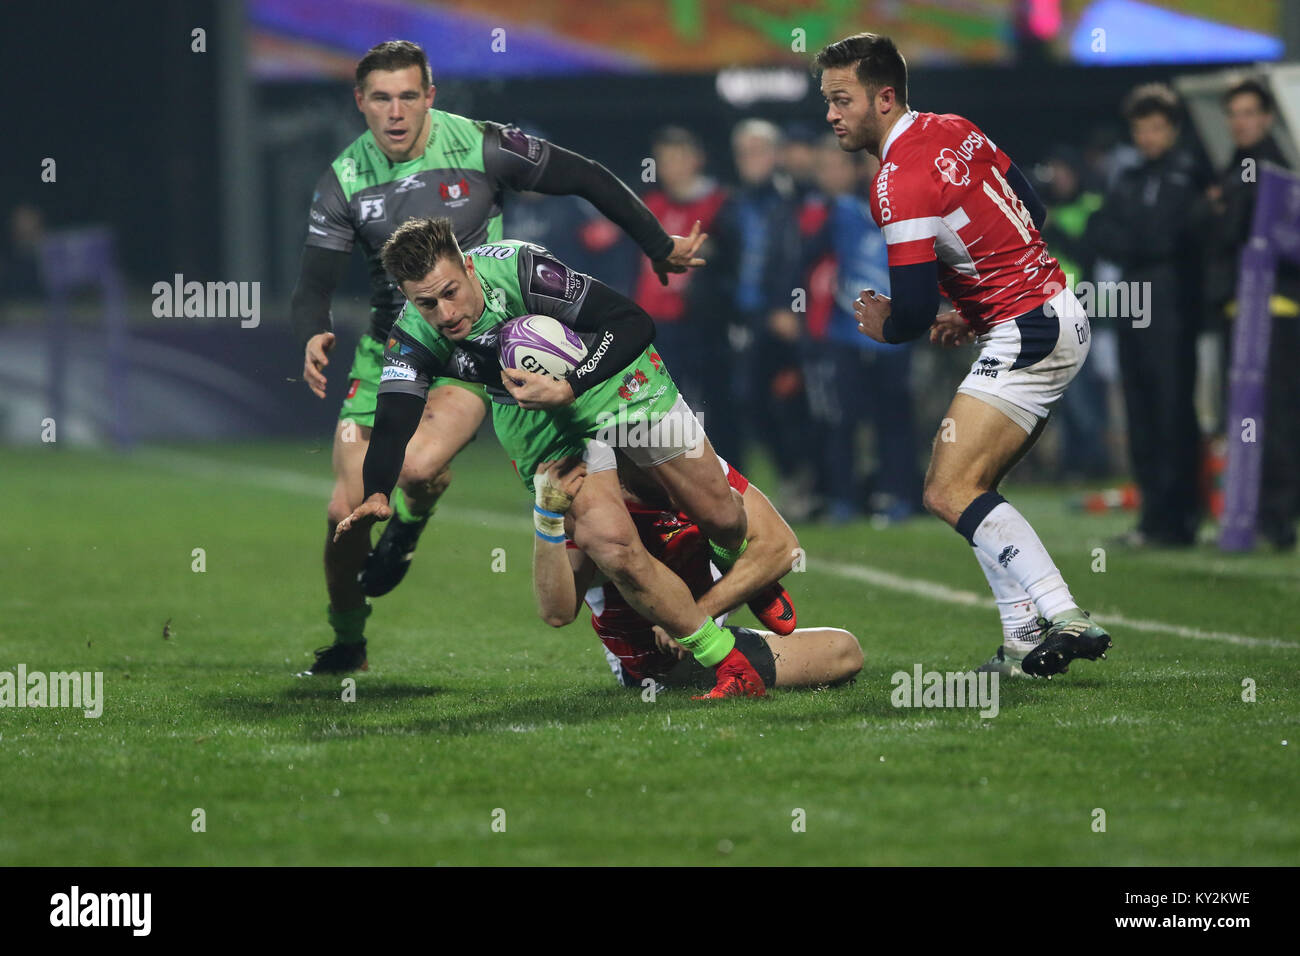 Agen, France. 12th Jan, 2018. Gloucester's Mark Atkinson during the match opposing Agen vs Gloucester in EPCR Challenge Cup 2017/2018. Credit: Sebastien Lapeyrere/Alamy Live News. Stock Photo